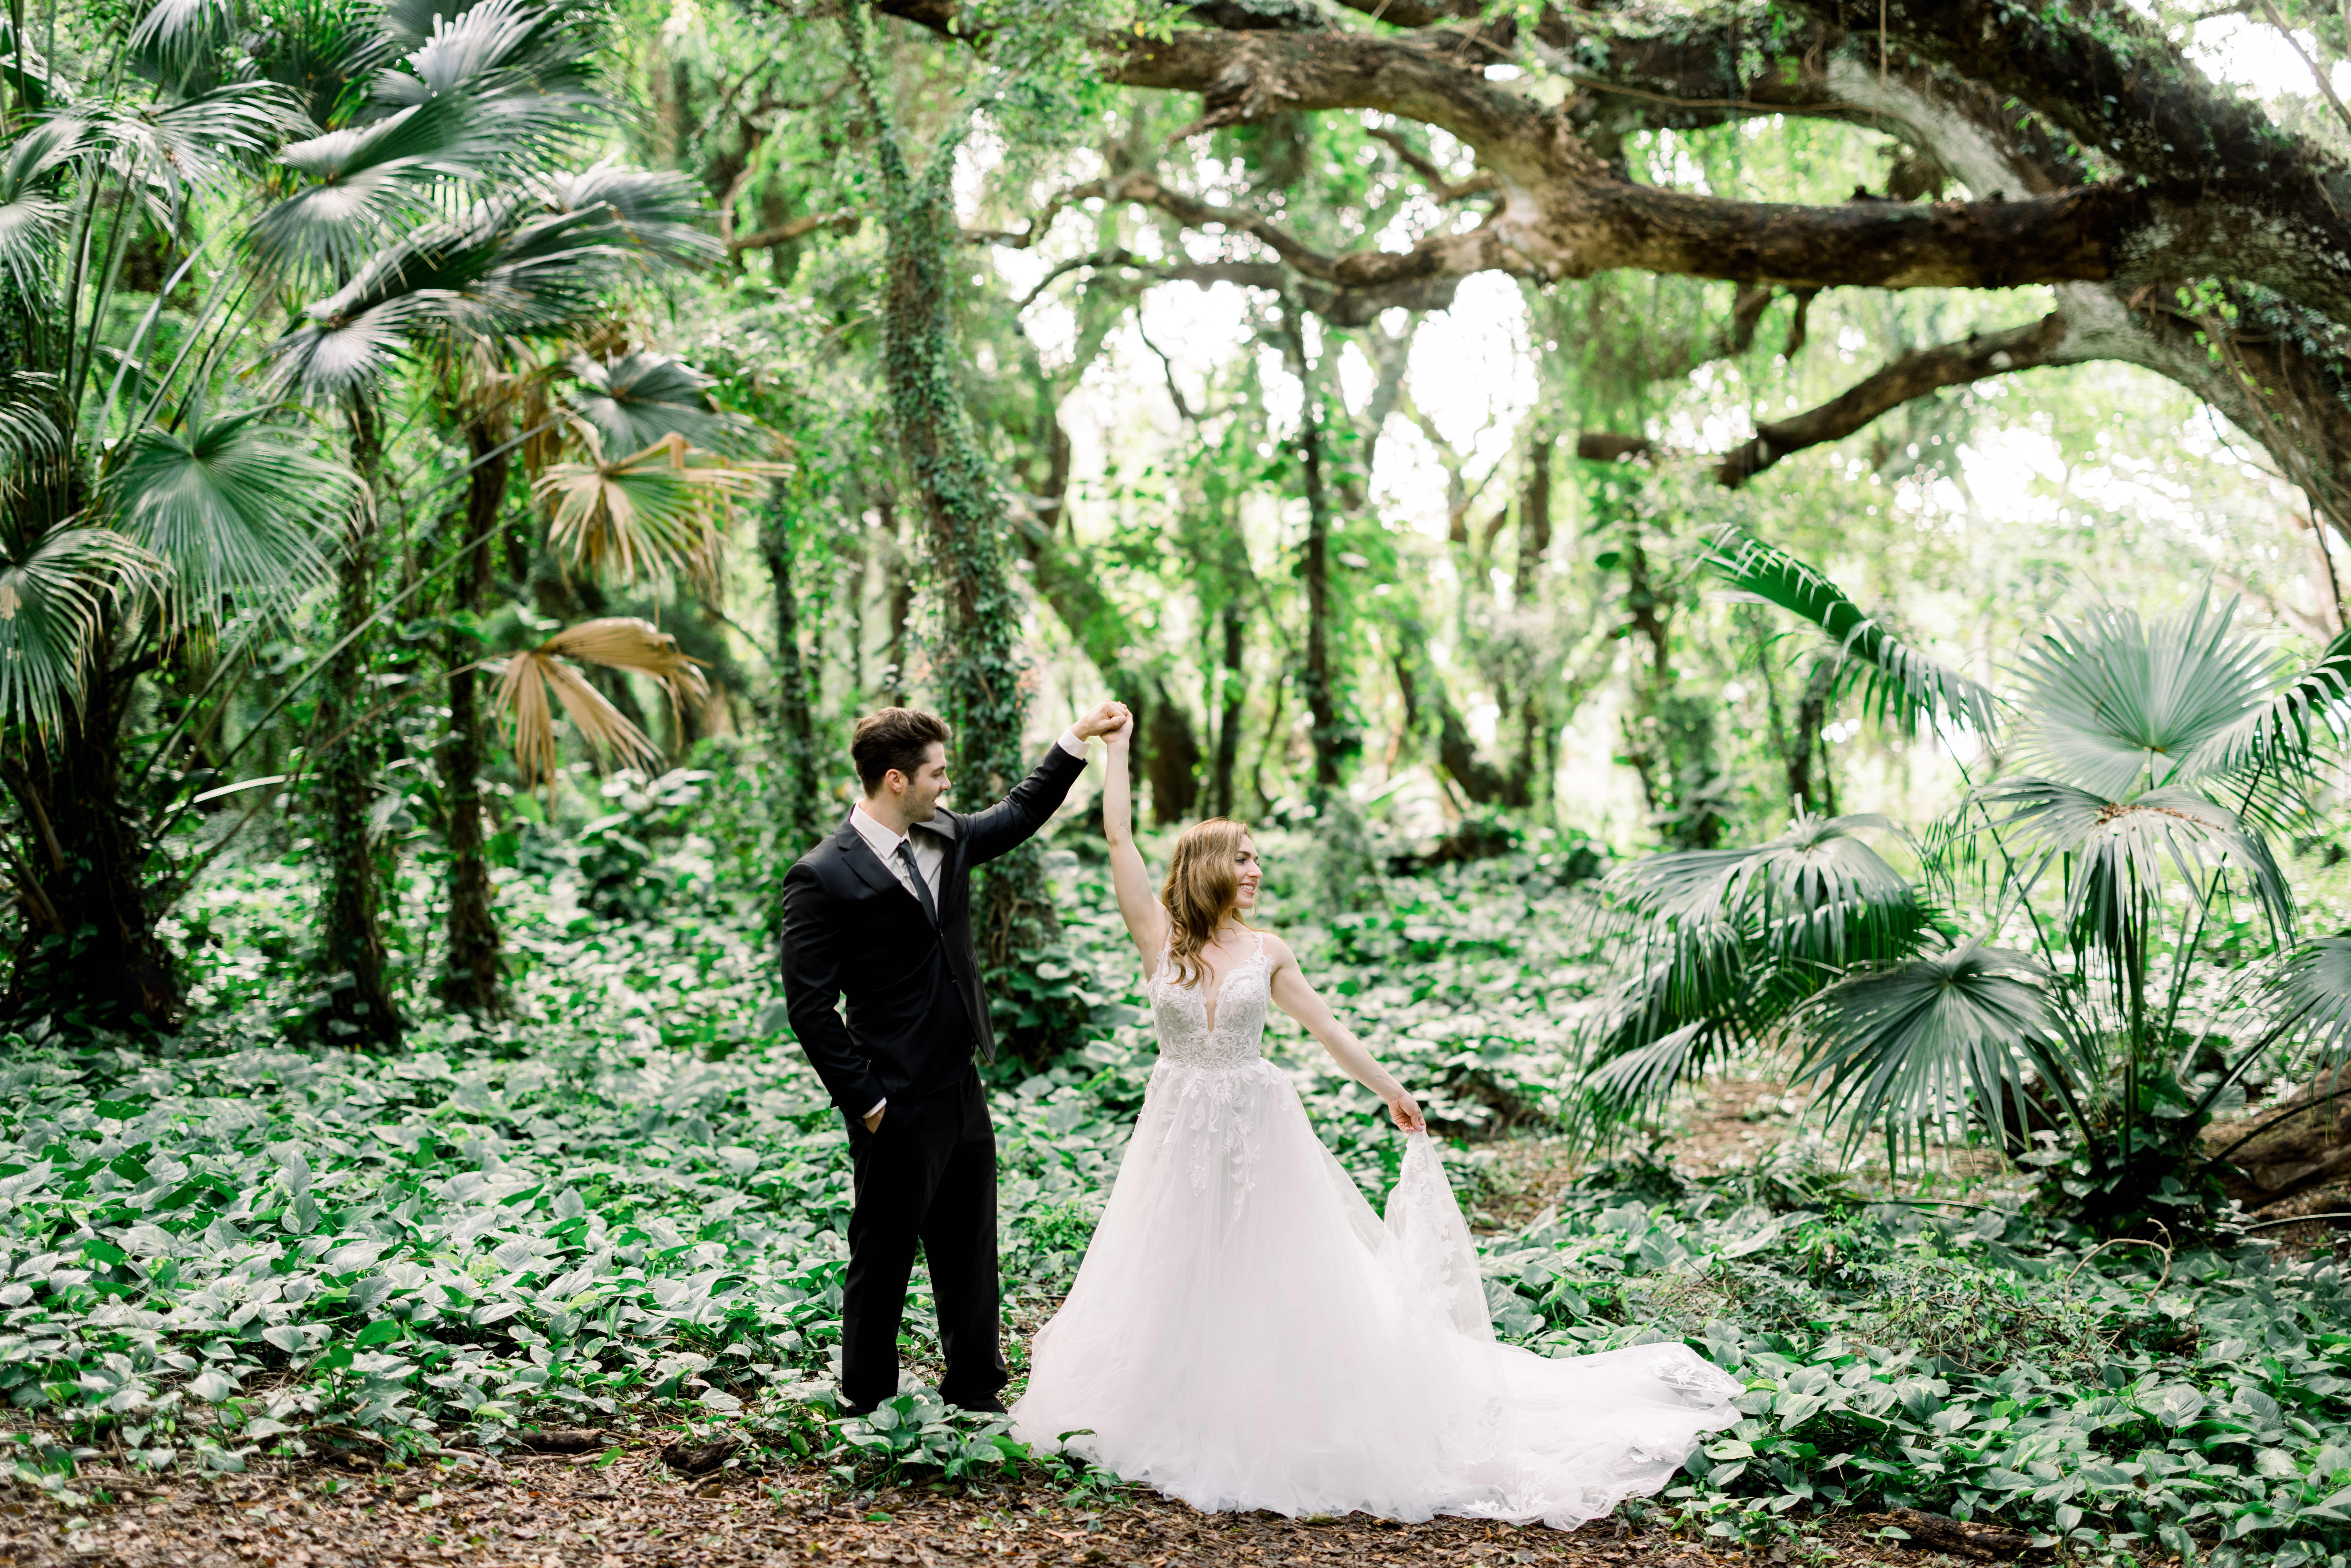 Couple at tropical forest in Maui holding hands over head while woman using other hand to hold the bottom of her wedding dress